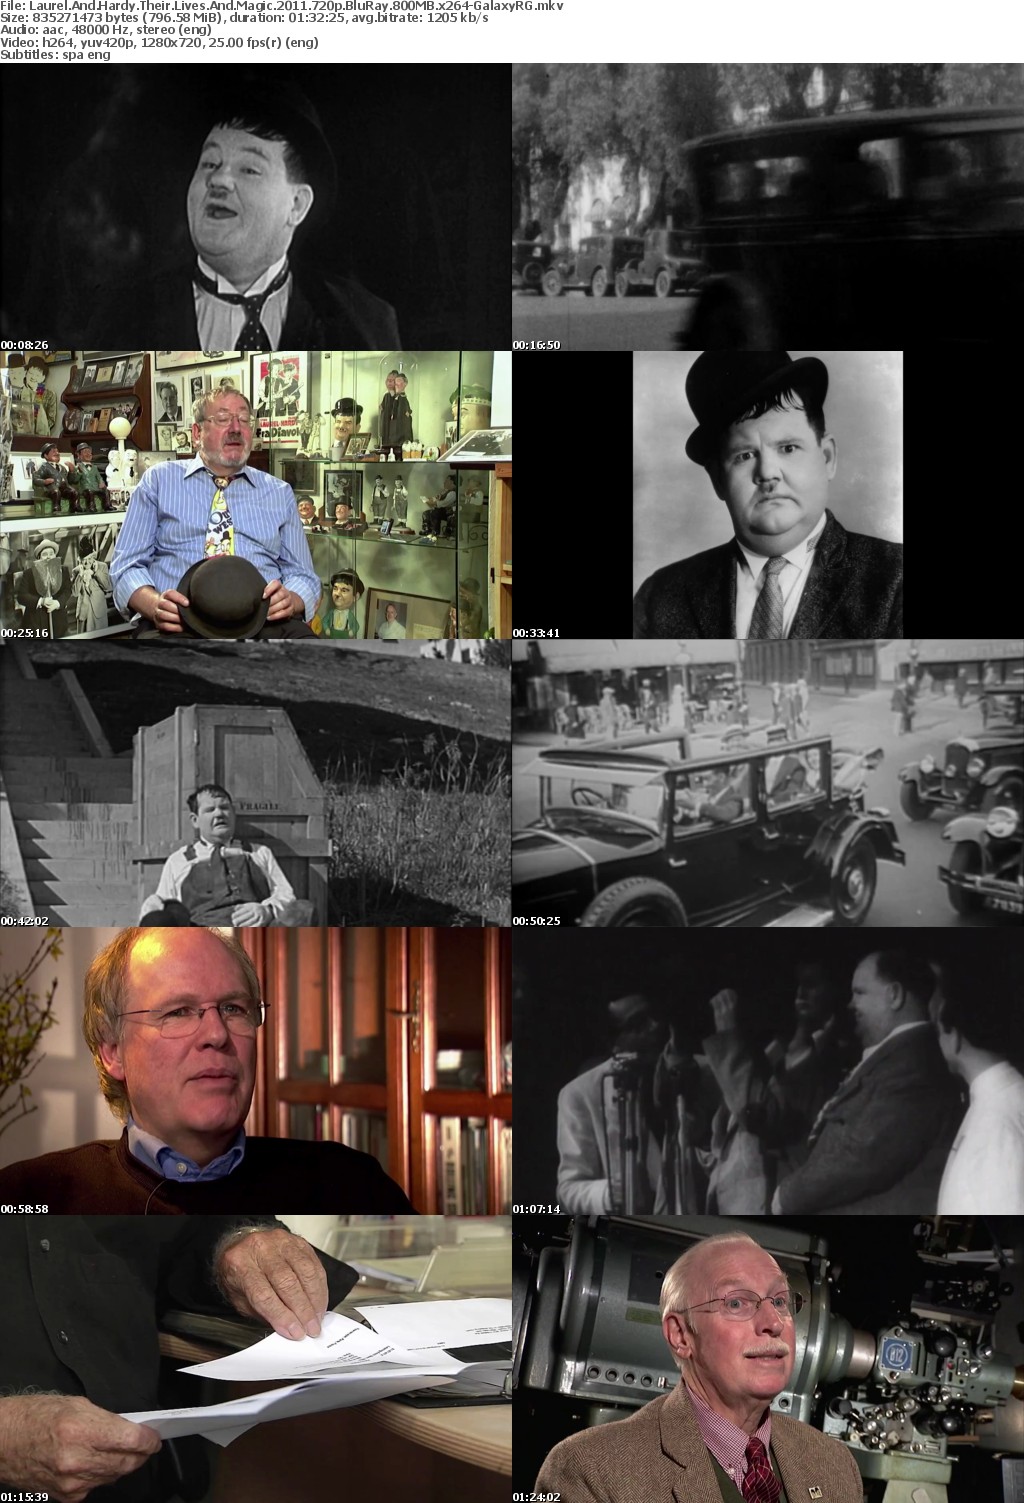 Laurel And Hardy Their Lives And Magic 2011 720p BluRay 800MB x264-GalaxyRG